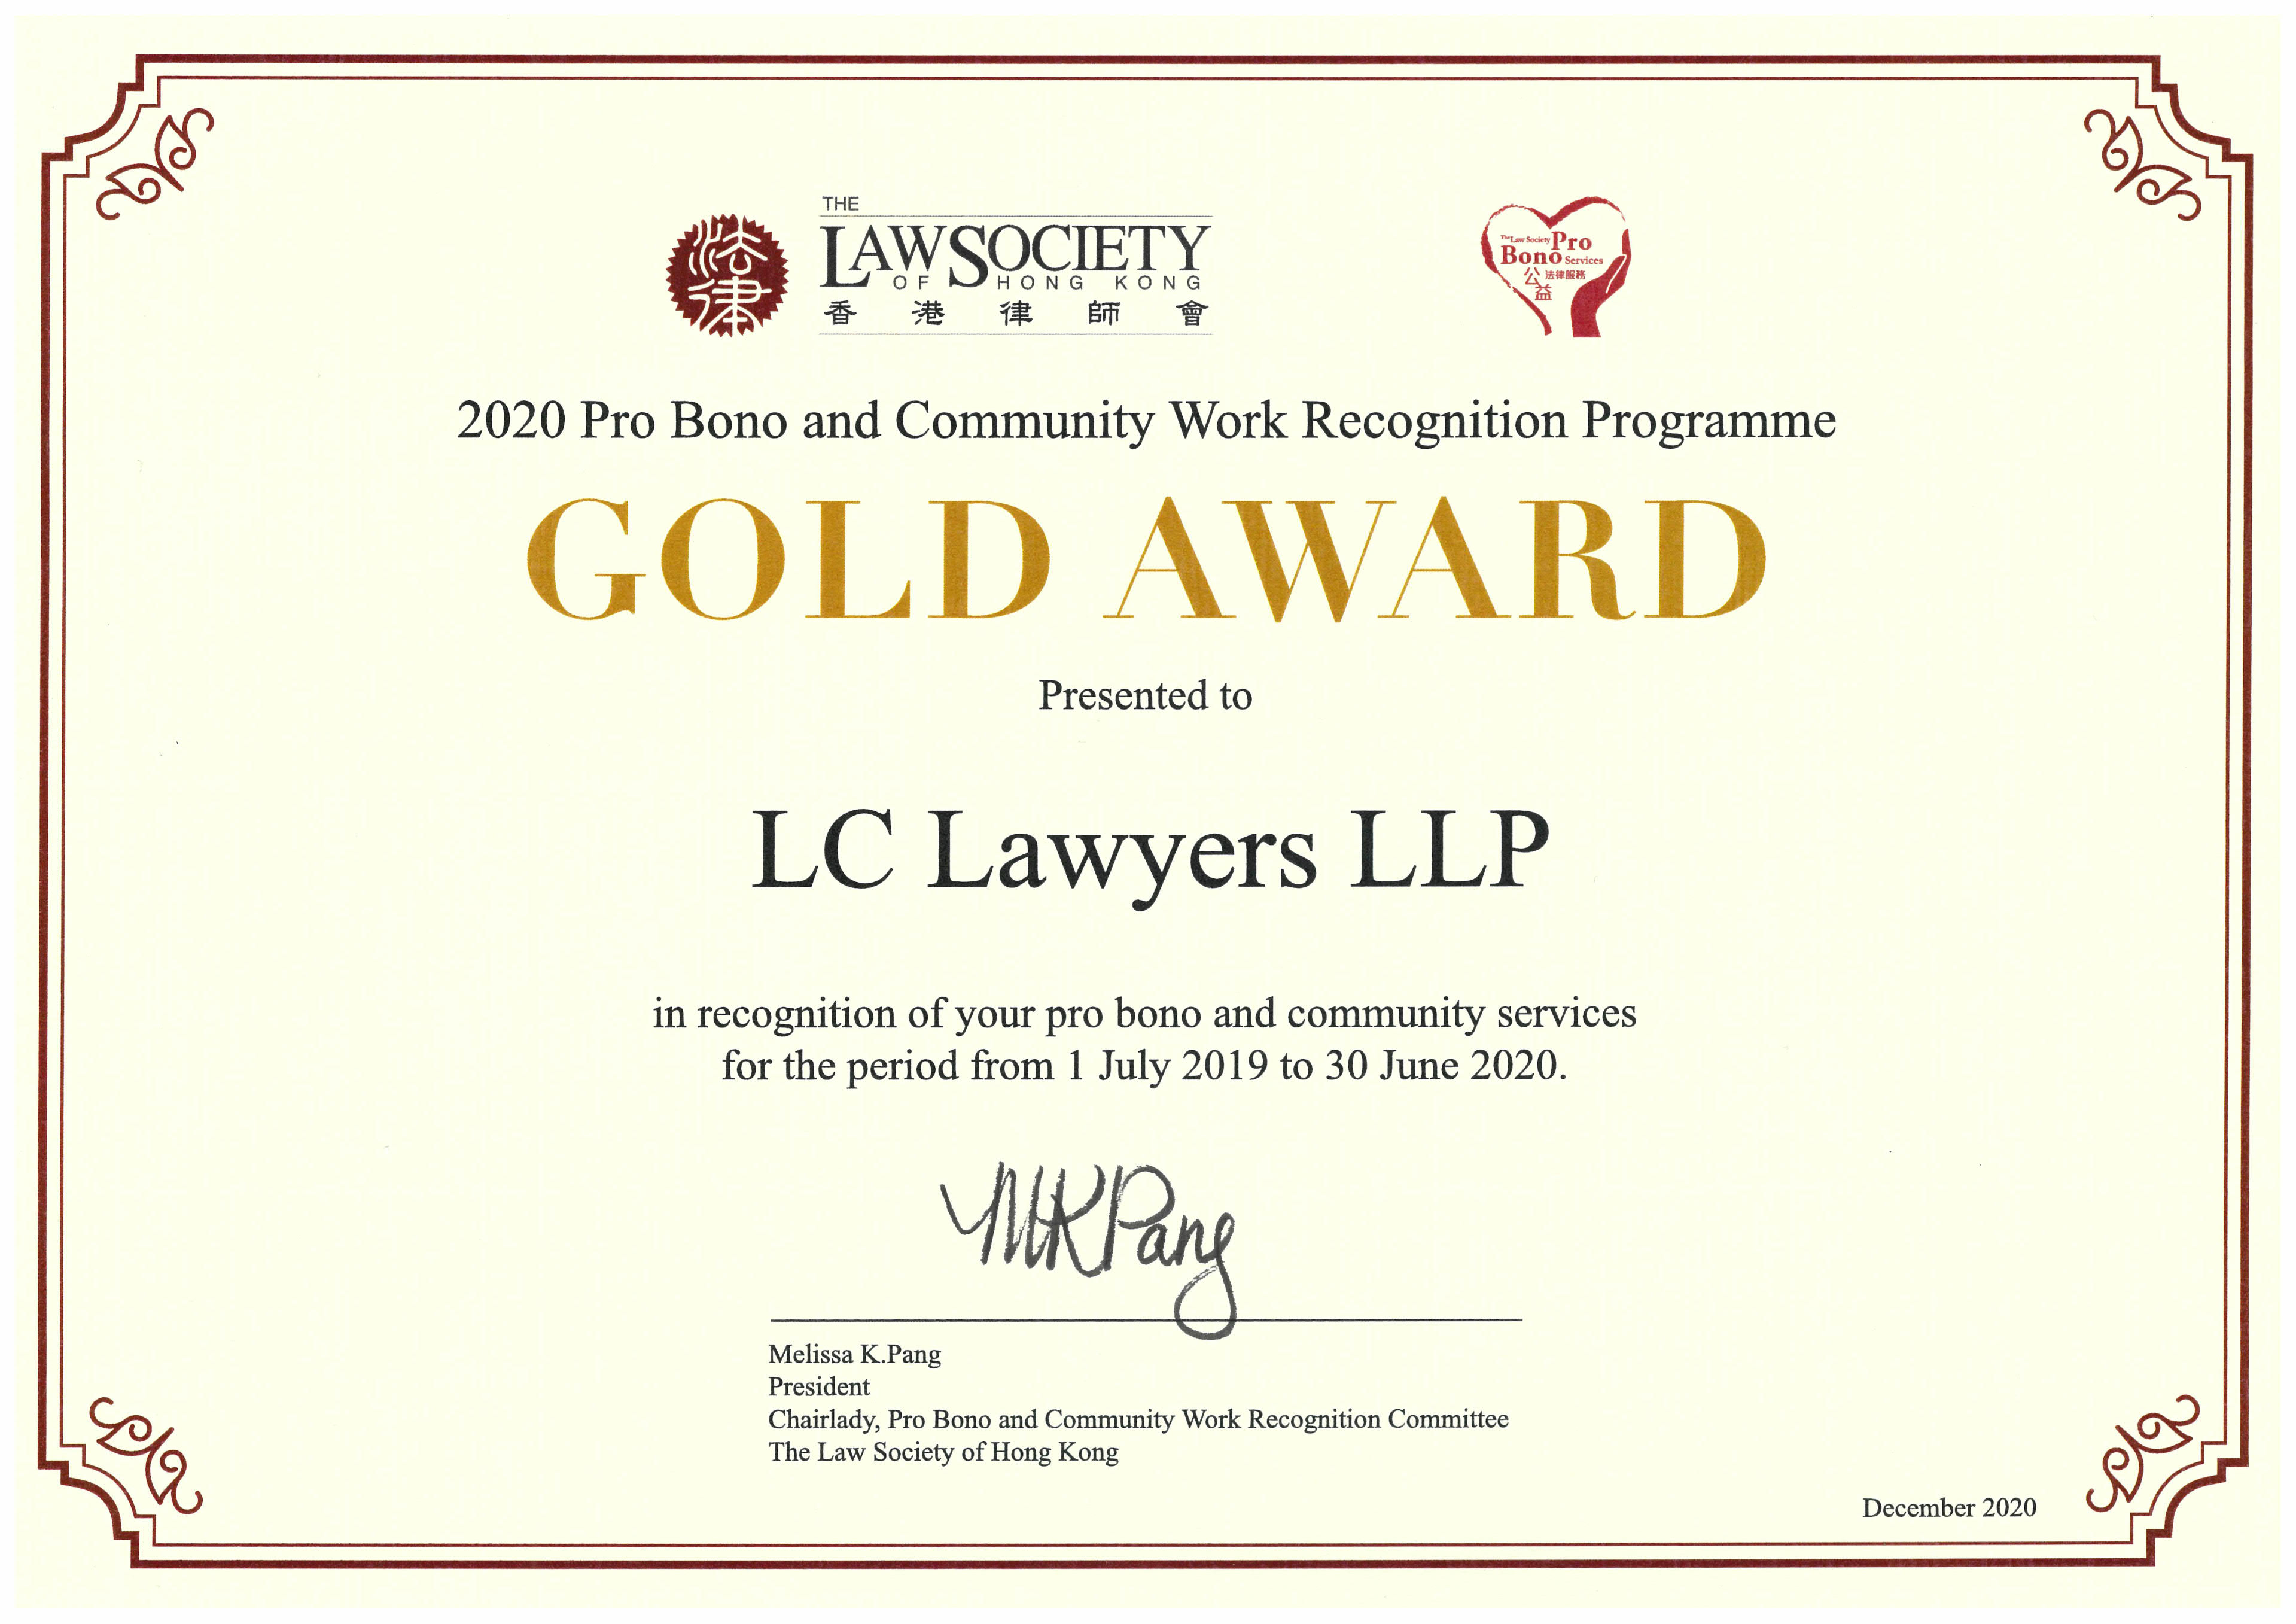 Gold Law Firm Award in Pro Bono Service by The Law Society of Hong Kong, 2019-2020